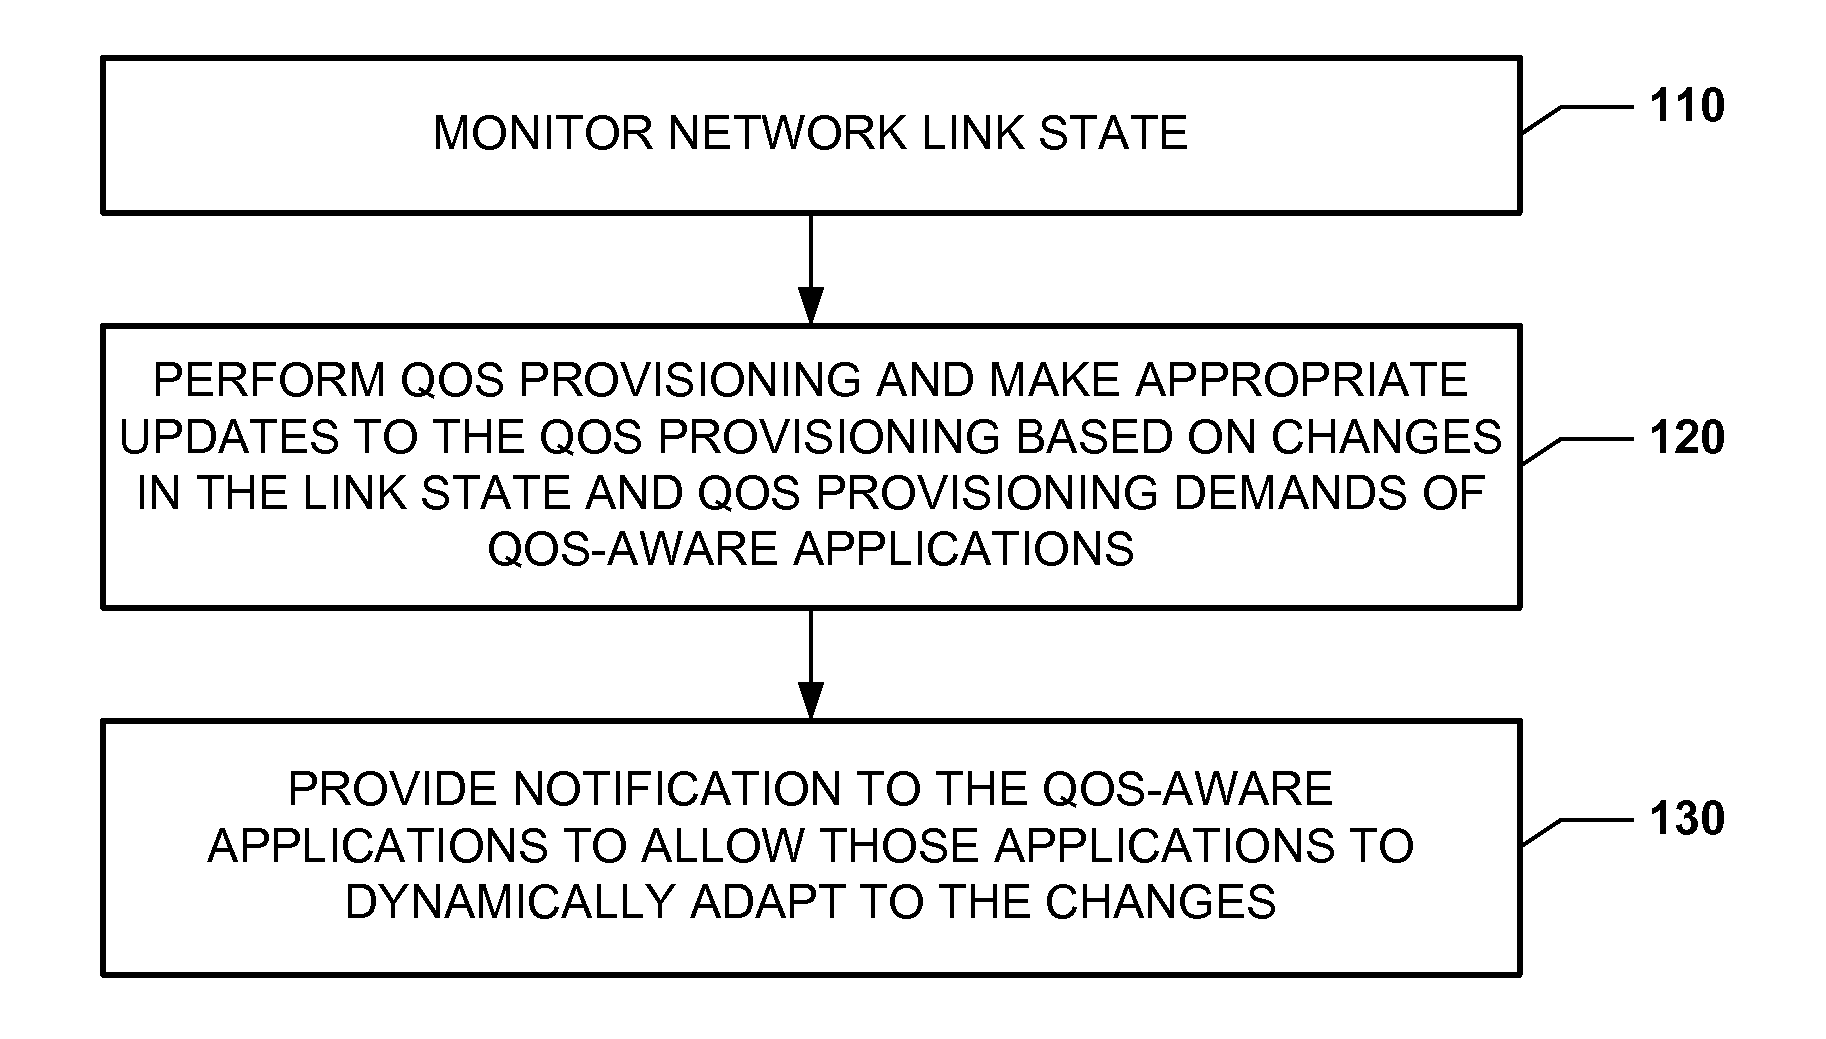 QOS provisioning in a network having dynamic link states